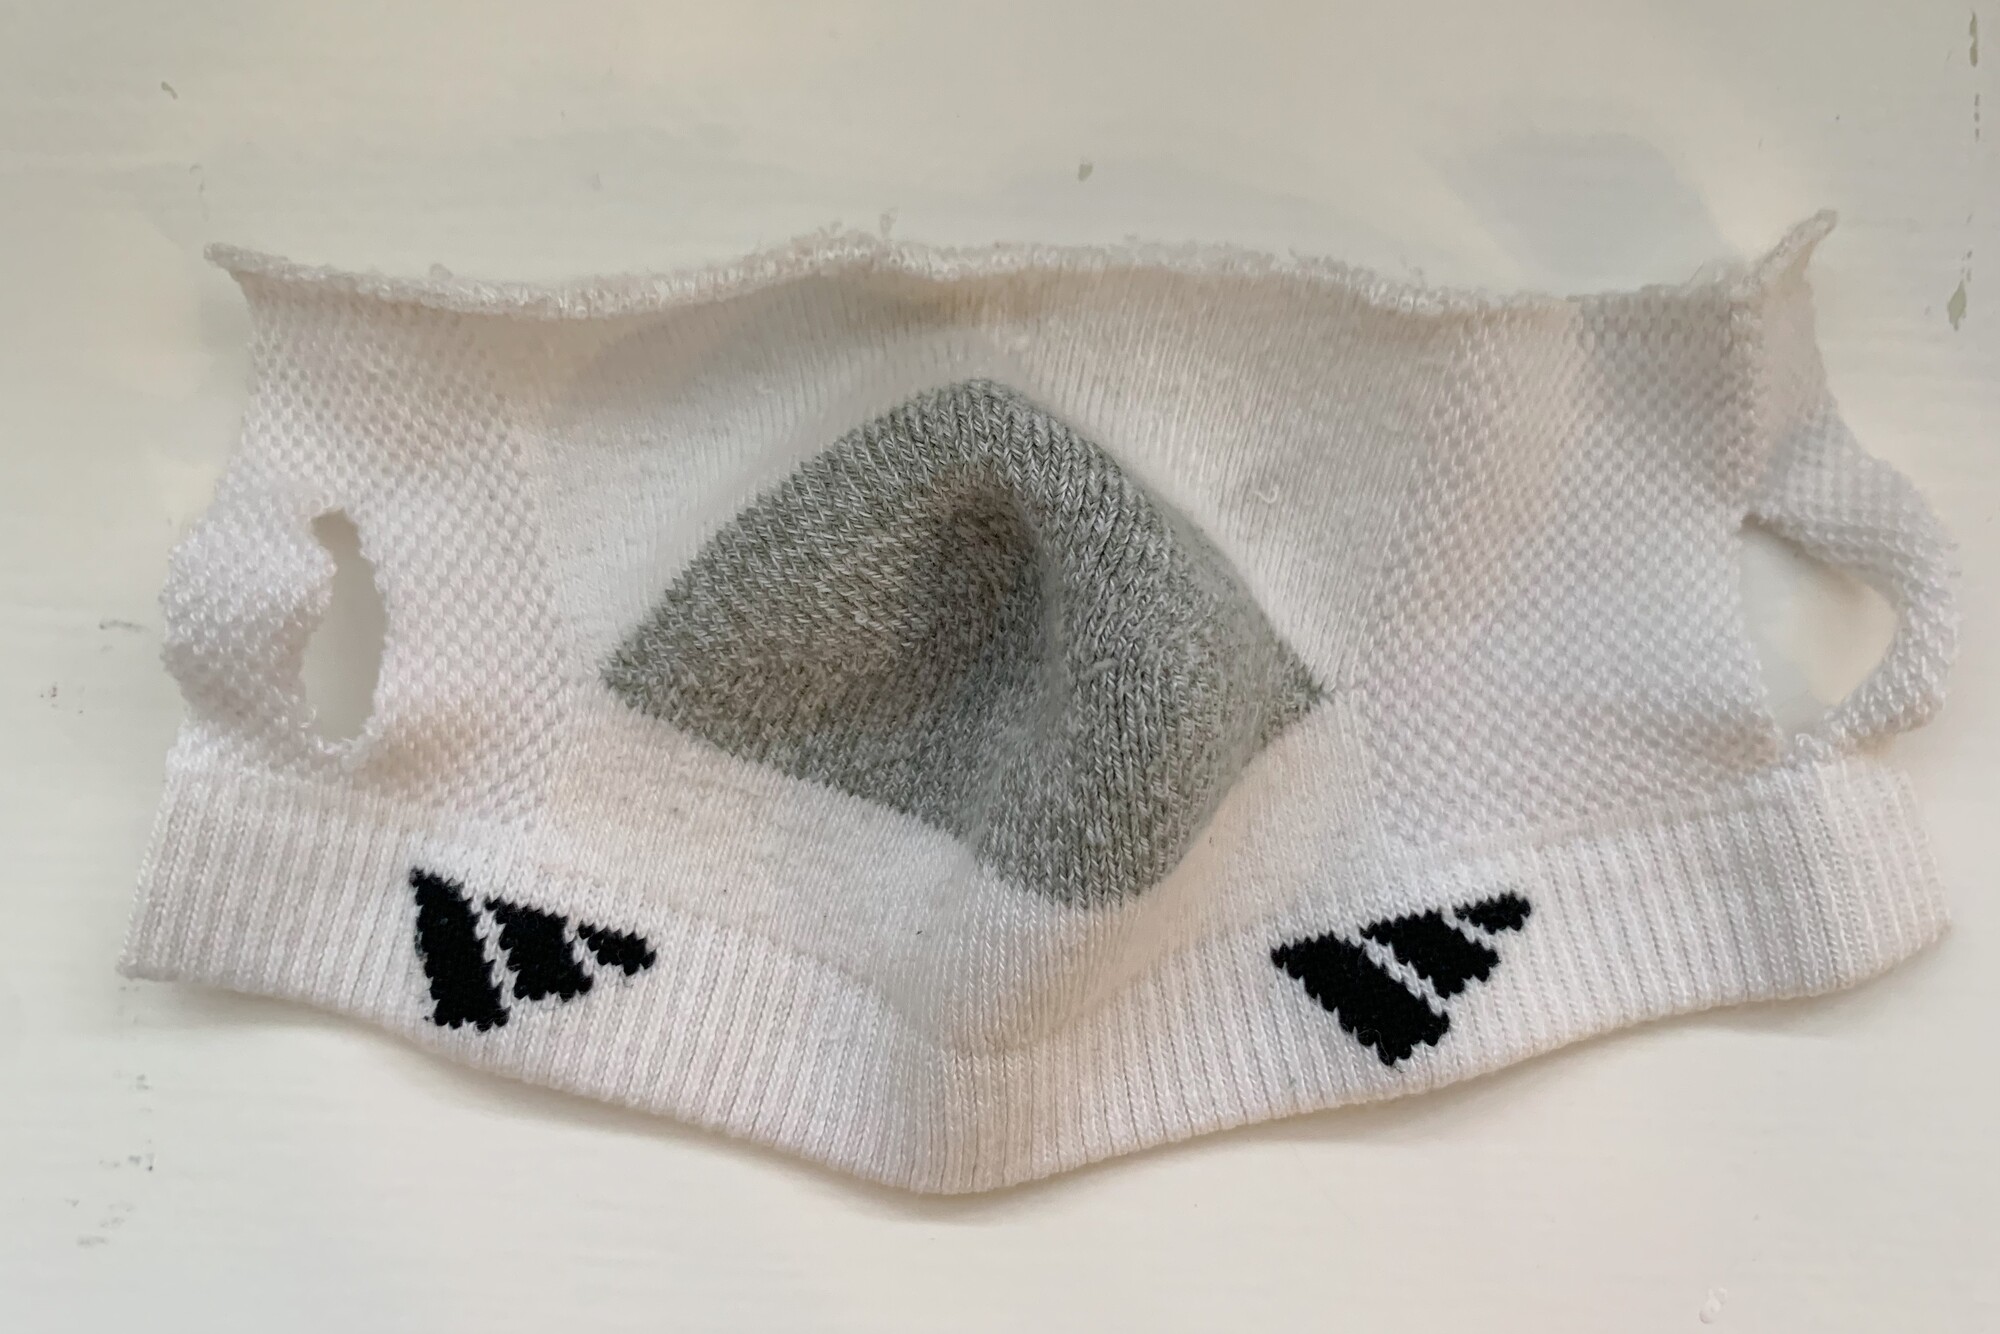 a mask made from the heel portion of a sock